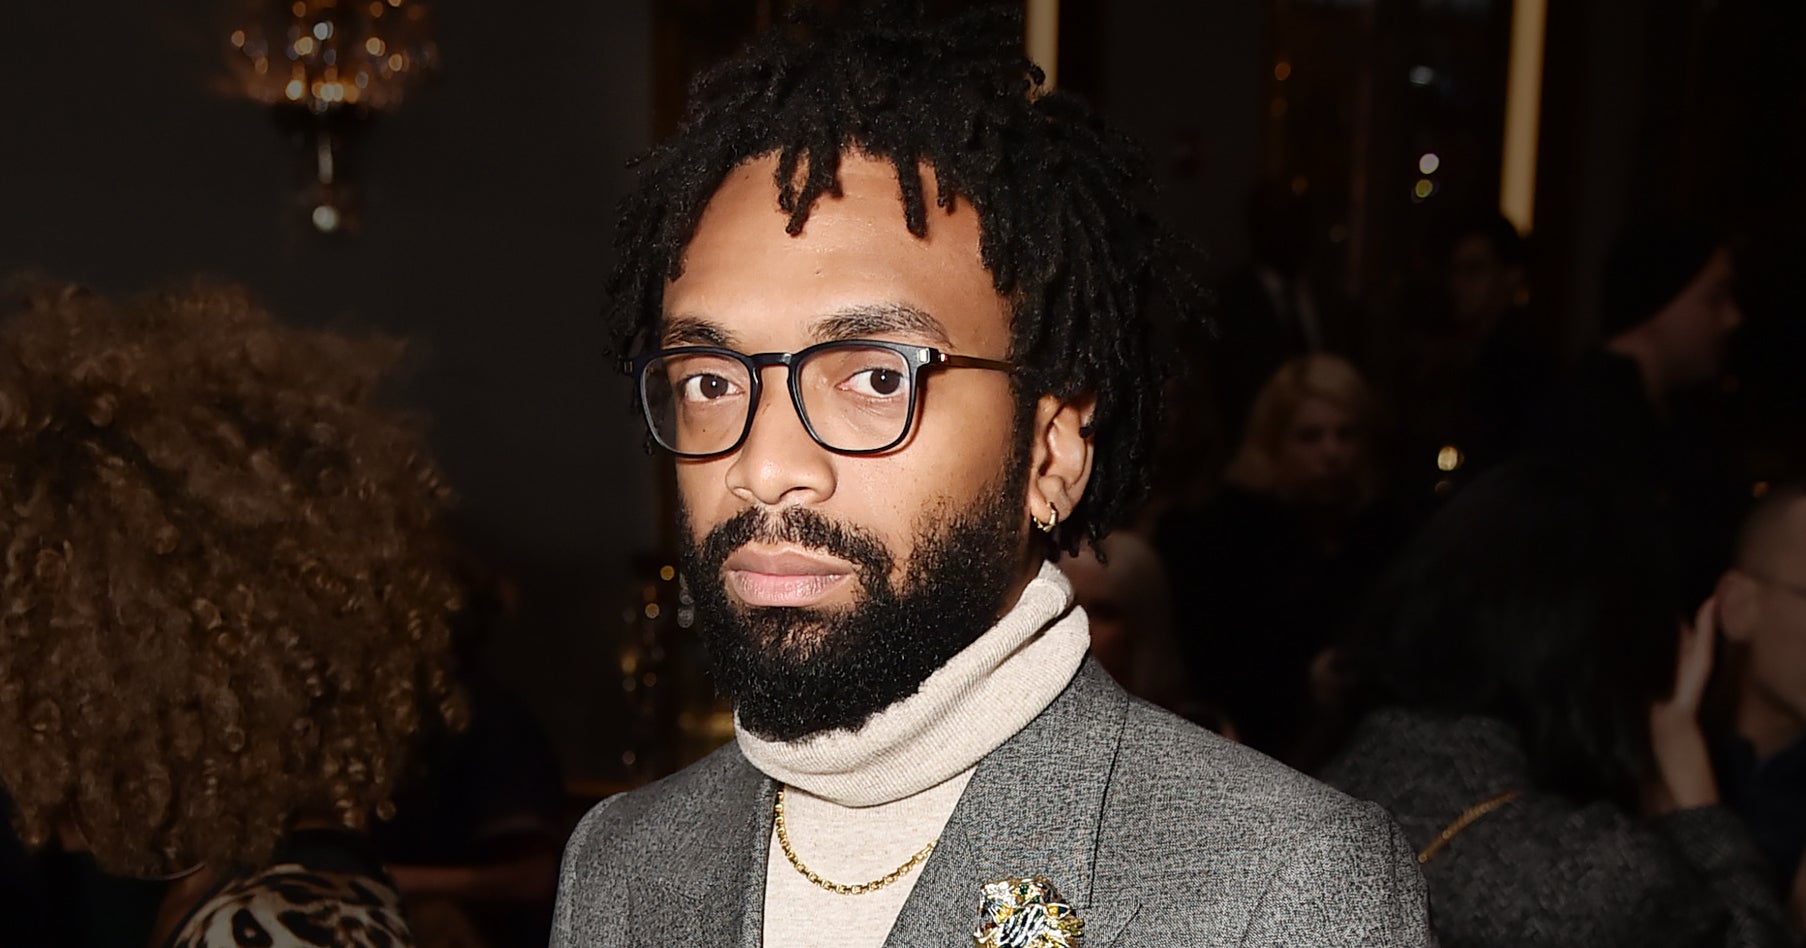 Pyer Moss's Kerby Jean-Raymond becomes first Black designer at